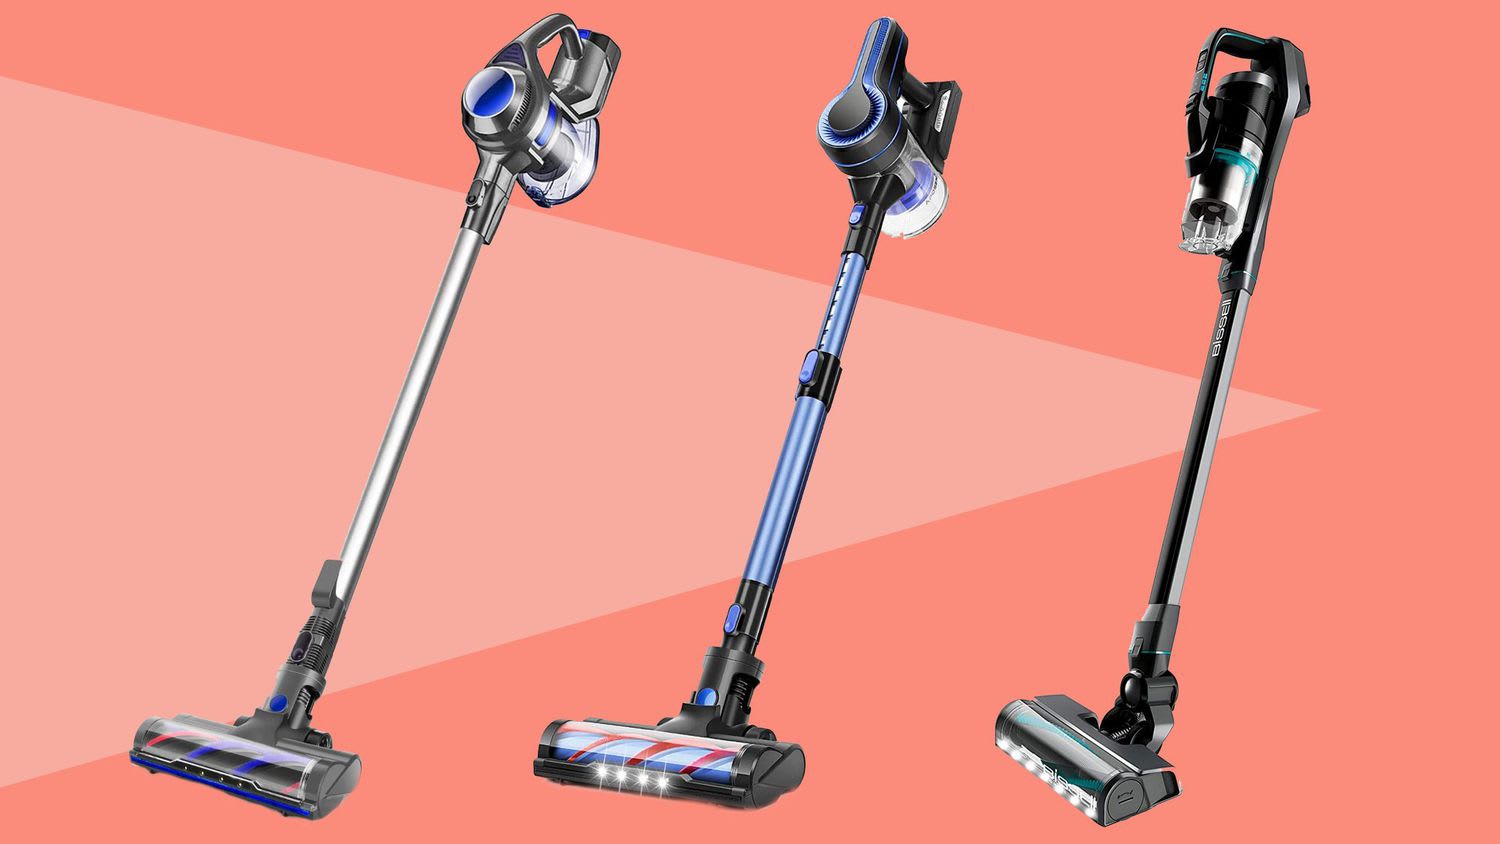 The 10 Best Cordless Vacuums for Hardwood Floors, According to Thousands of Reviews